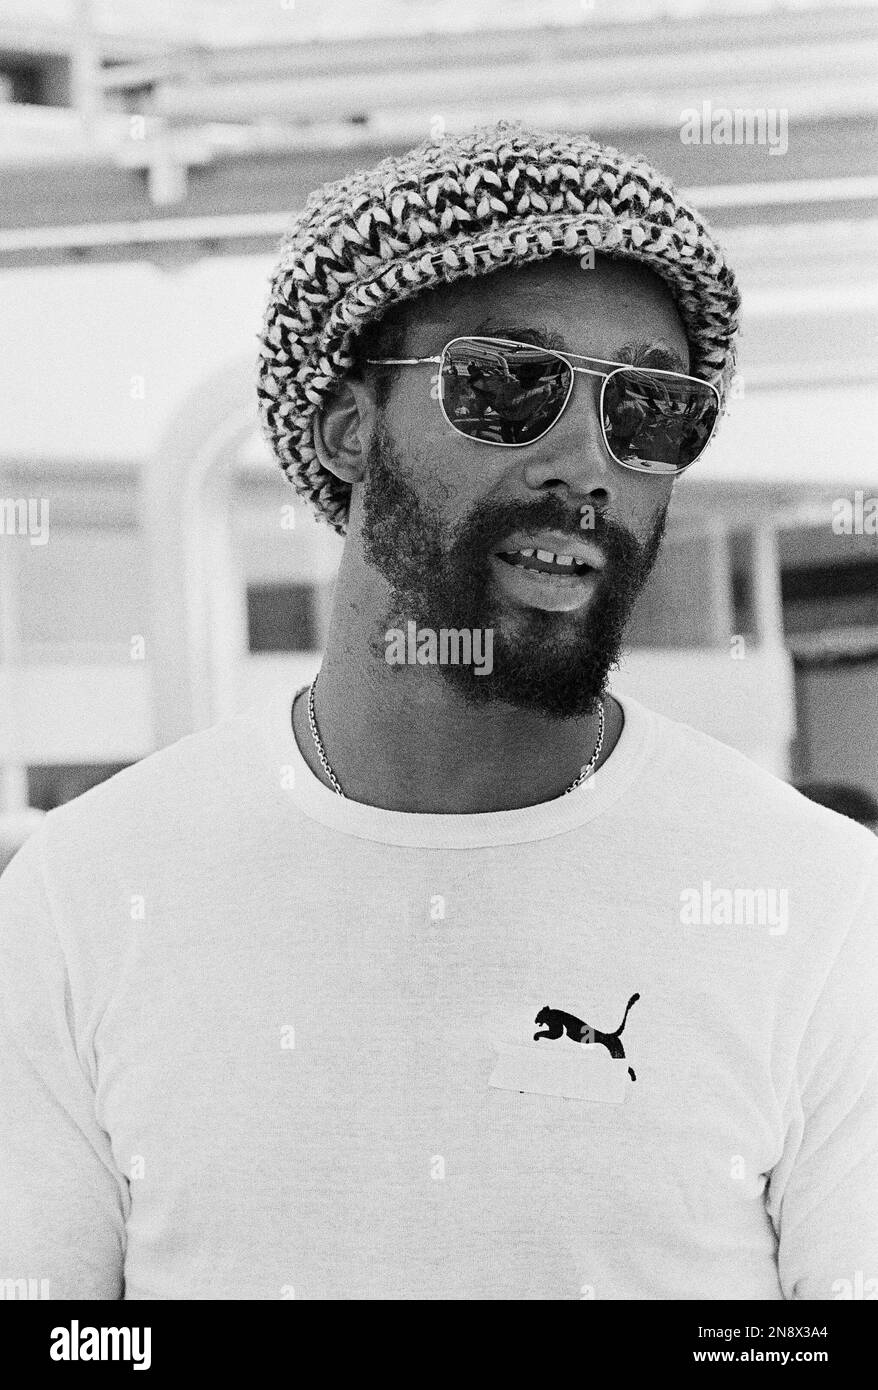 John Carlos, American gold medal sprinter from 1968 Mexico Olympics, wears  a t-shirt advertising the "Puma" brand of track shoes, but With the "Puma"  name taped over, in Olympic village after officials